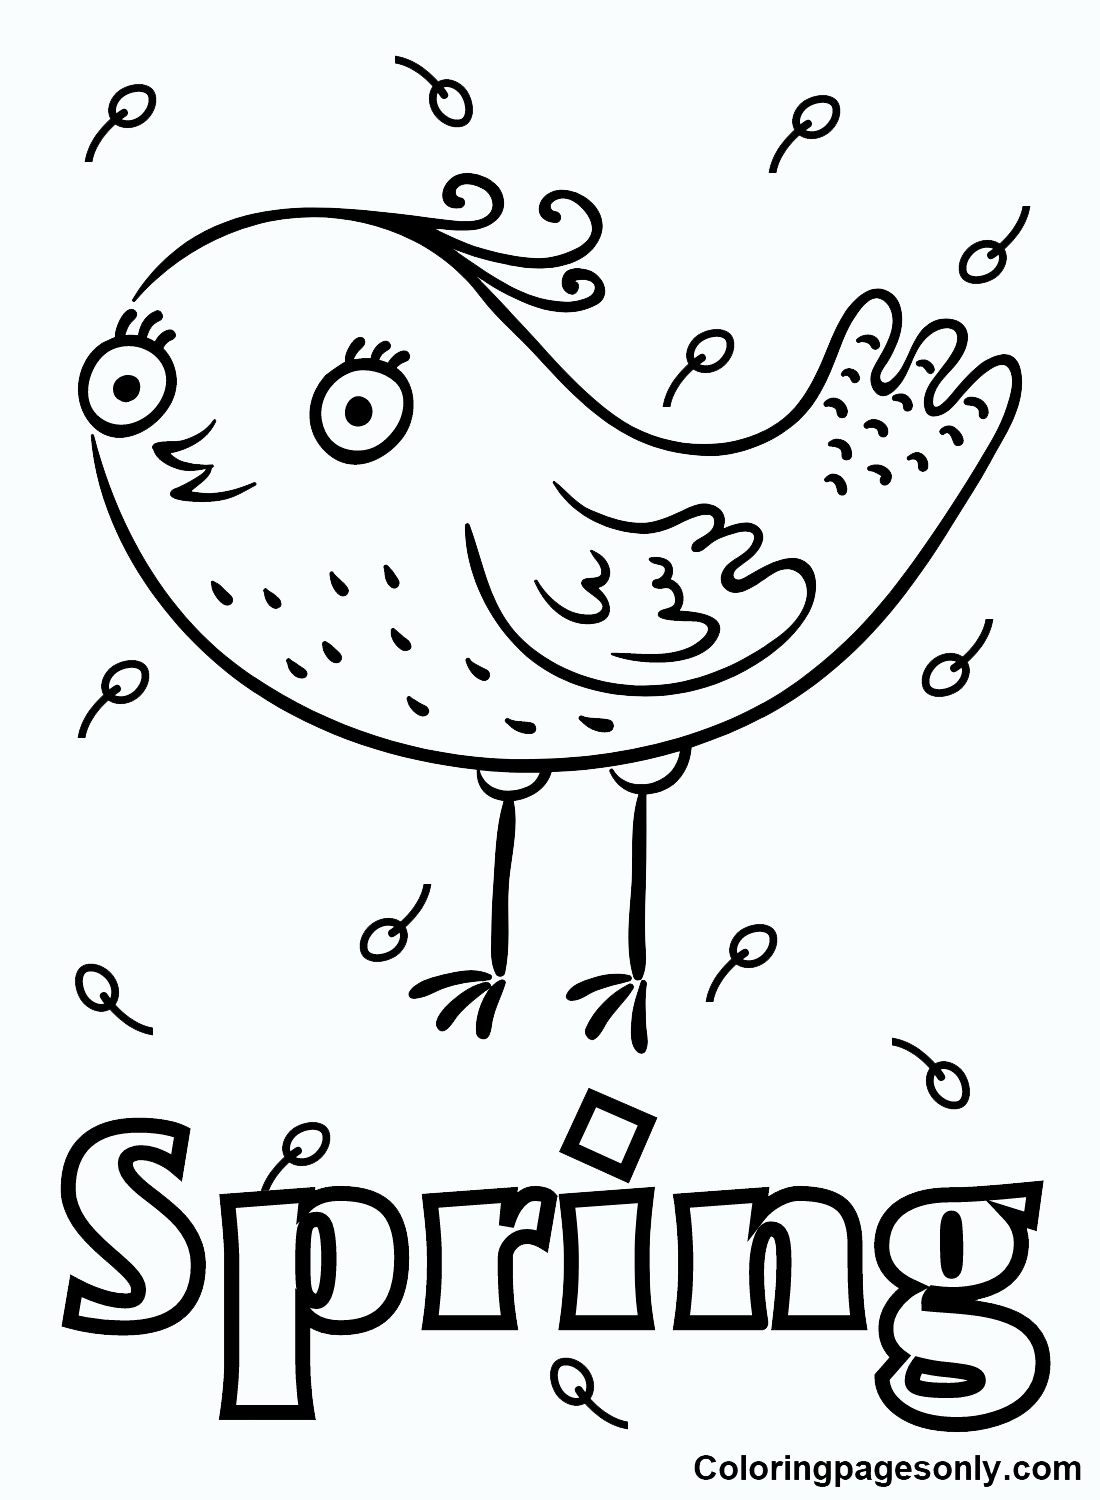 first-day-of-spring-coloring-pages-printable-for-free-download